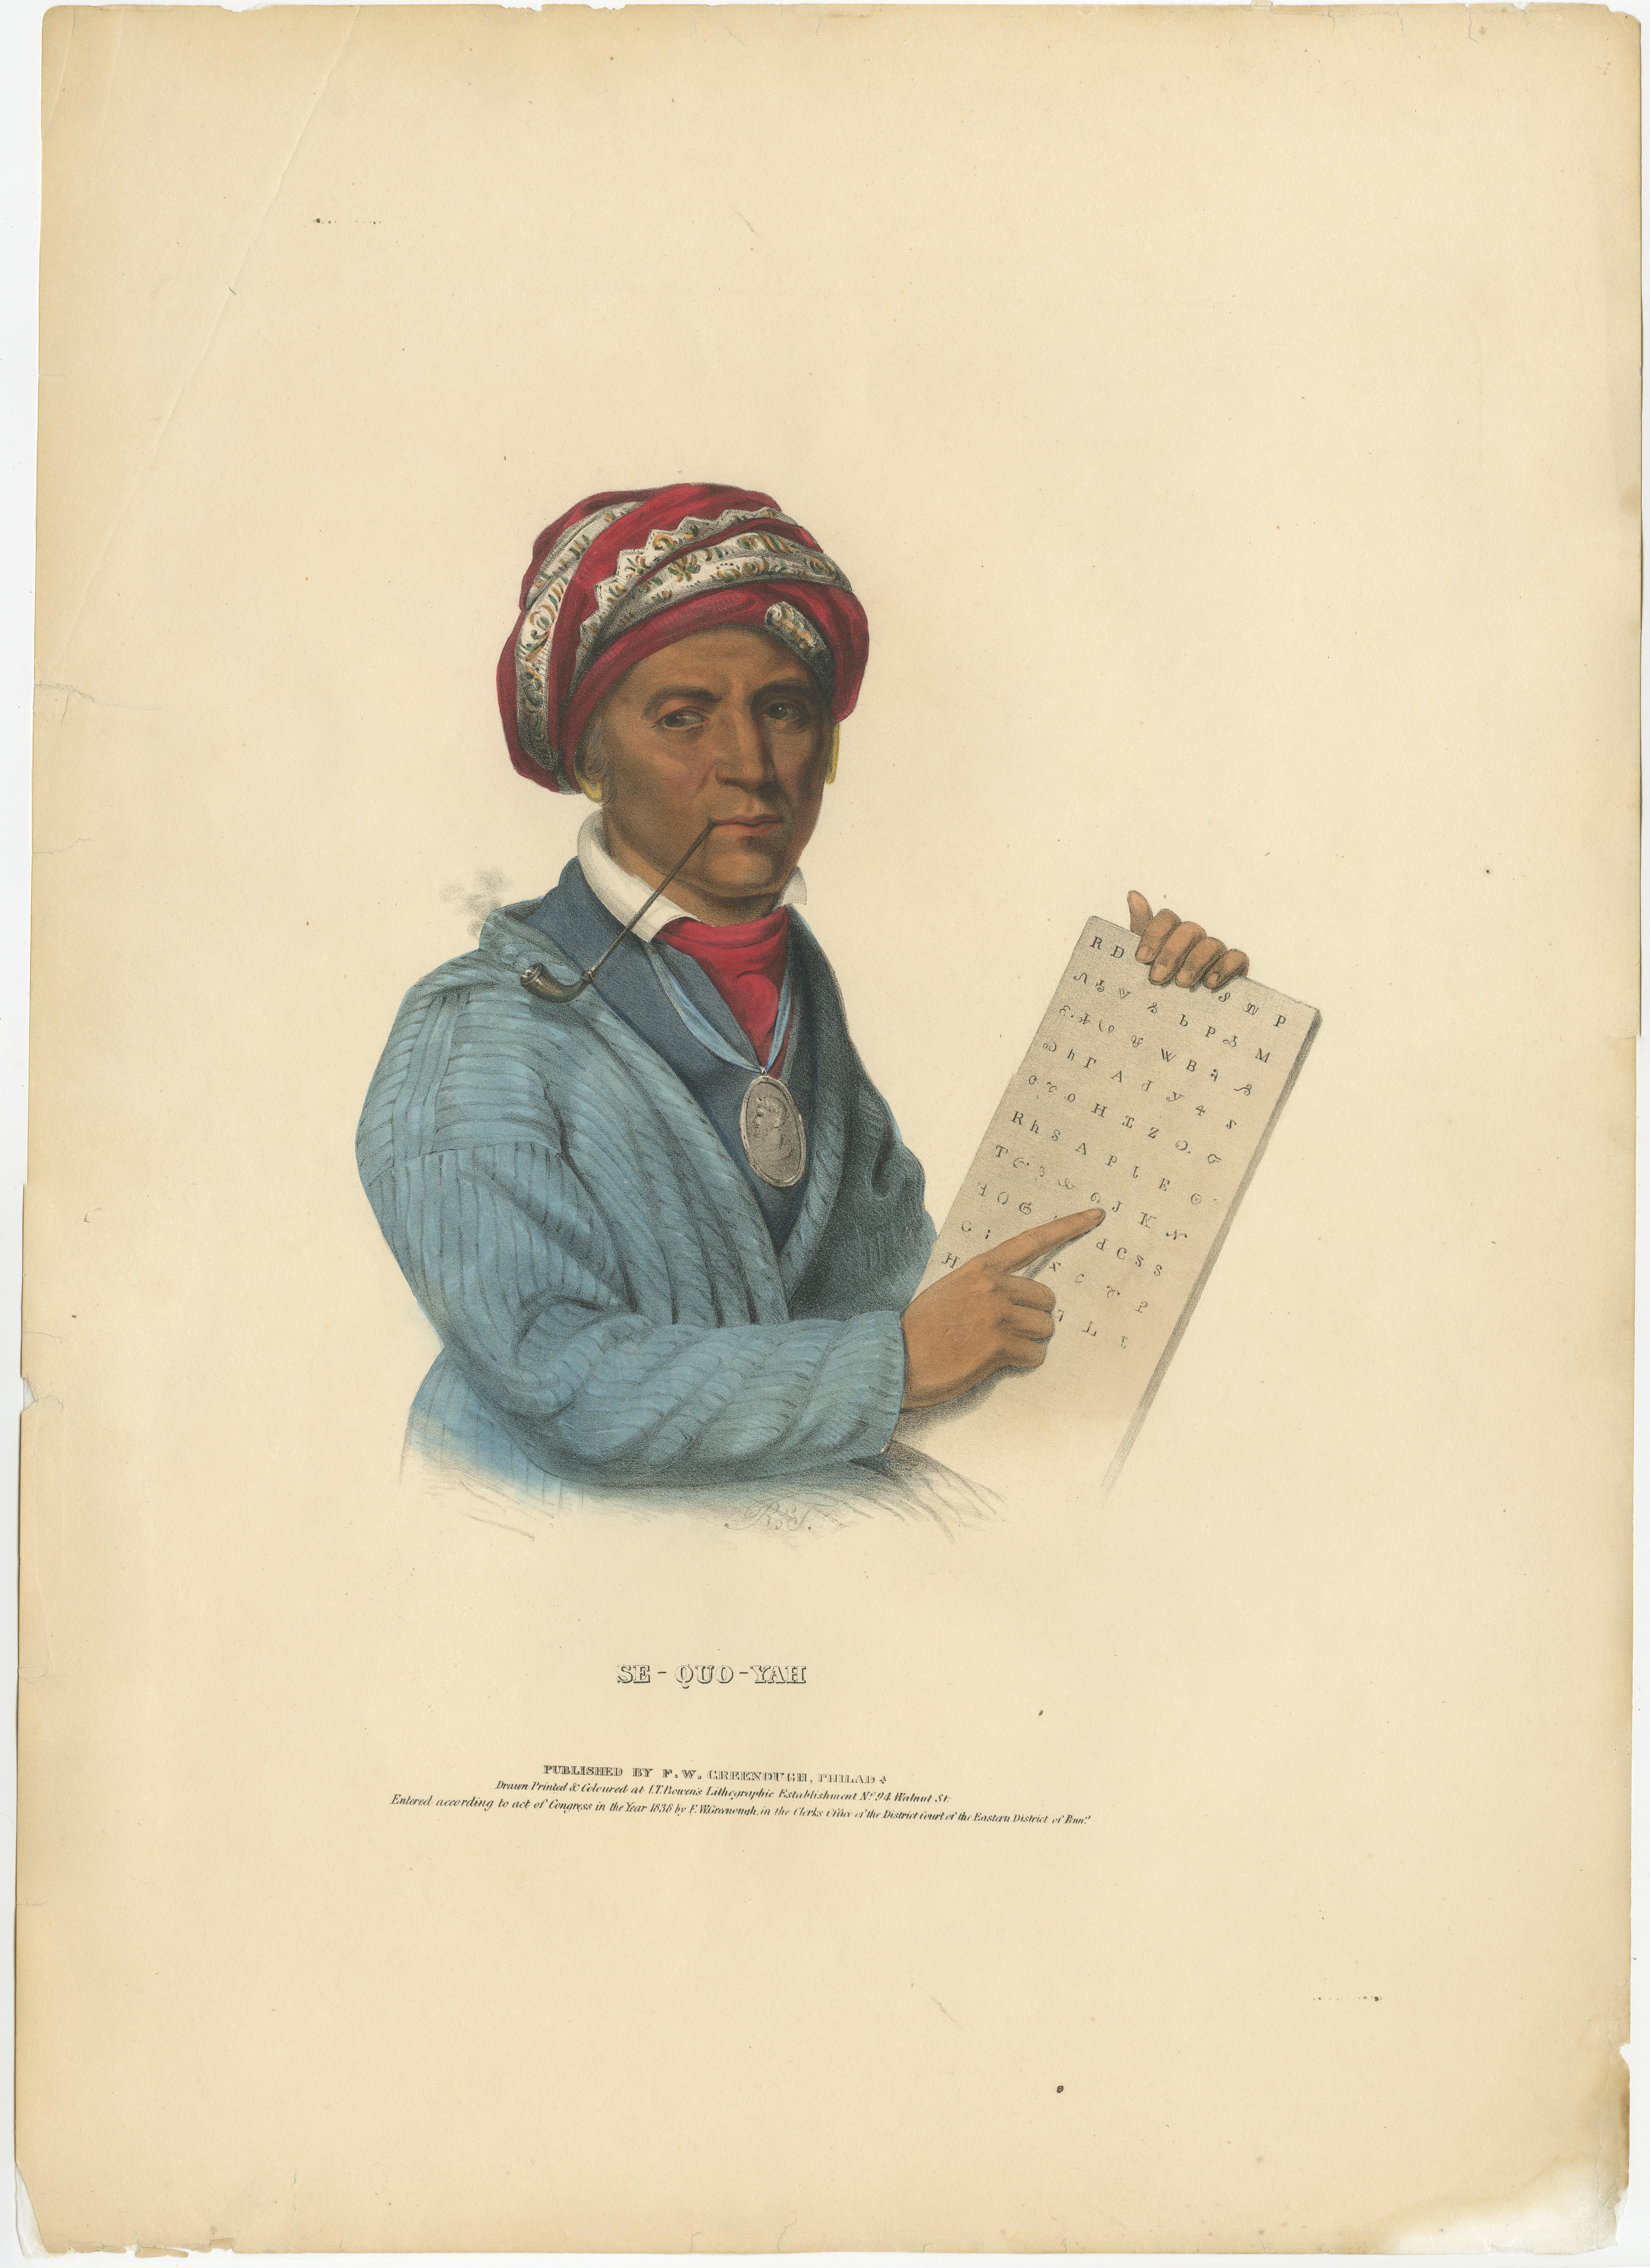 This lithograph represents Sequoyah, also known as George Gist or George Guess, a notable figure in Native American history for his extraordinary achievement as the creator of the Cherokee syllabary, making him a polymath and a neographer. The